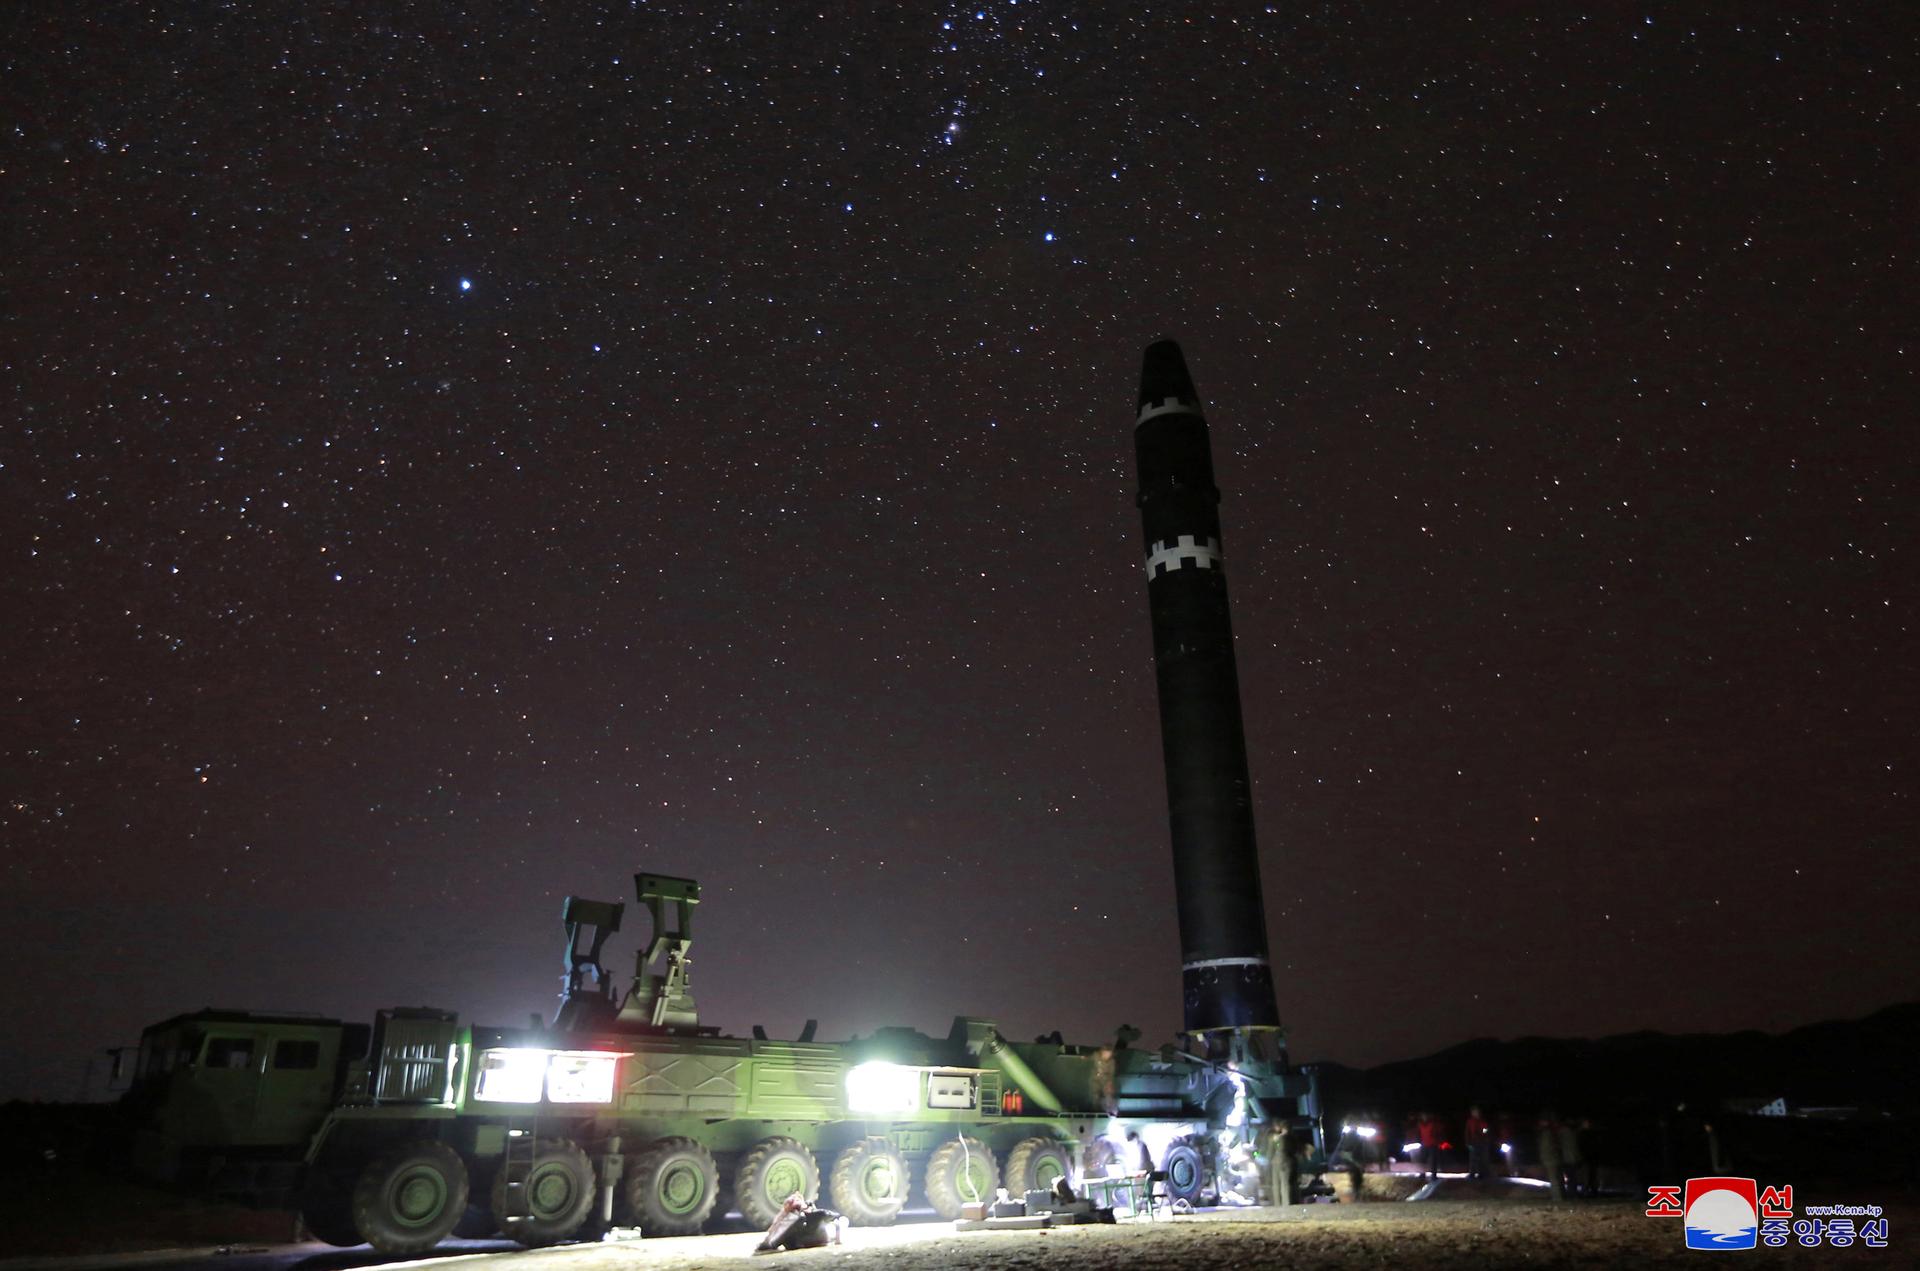 A view of the newly developed intercontinental ballistic rocket Hwasong-15